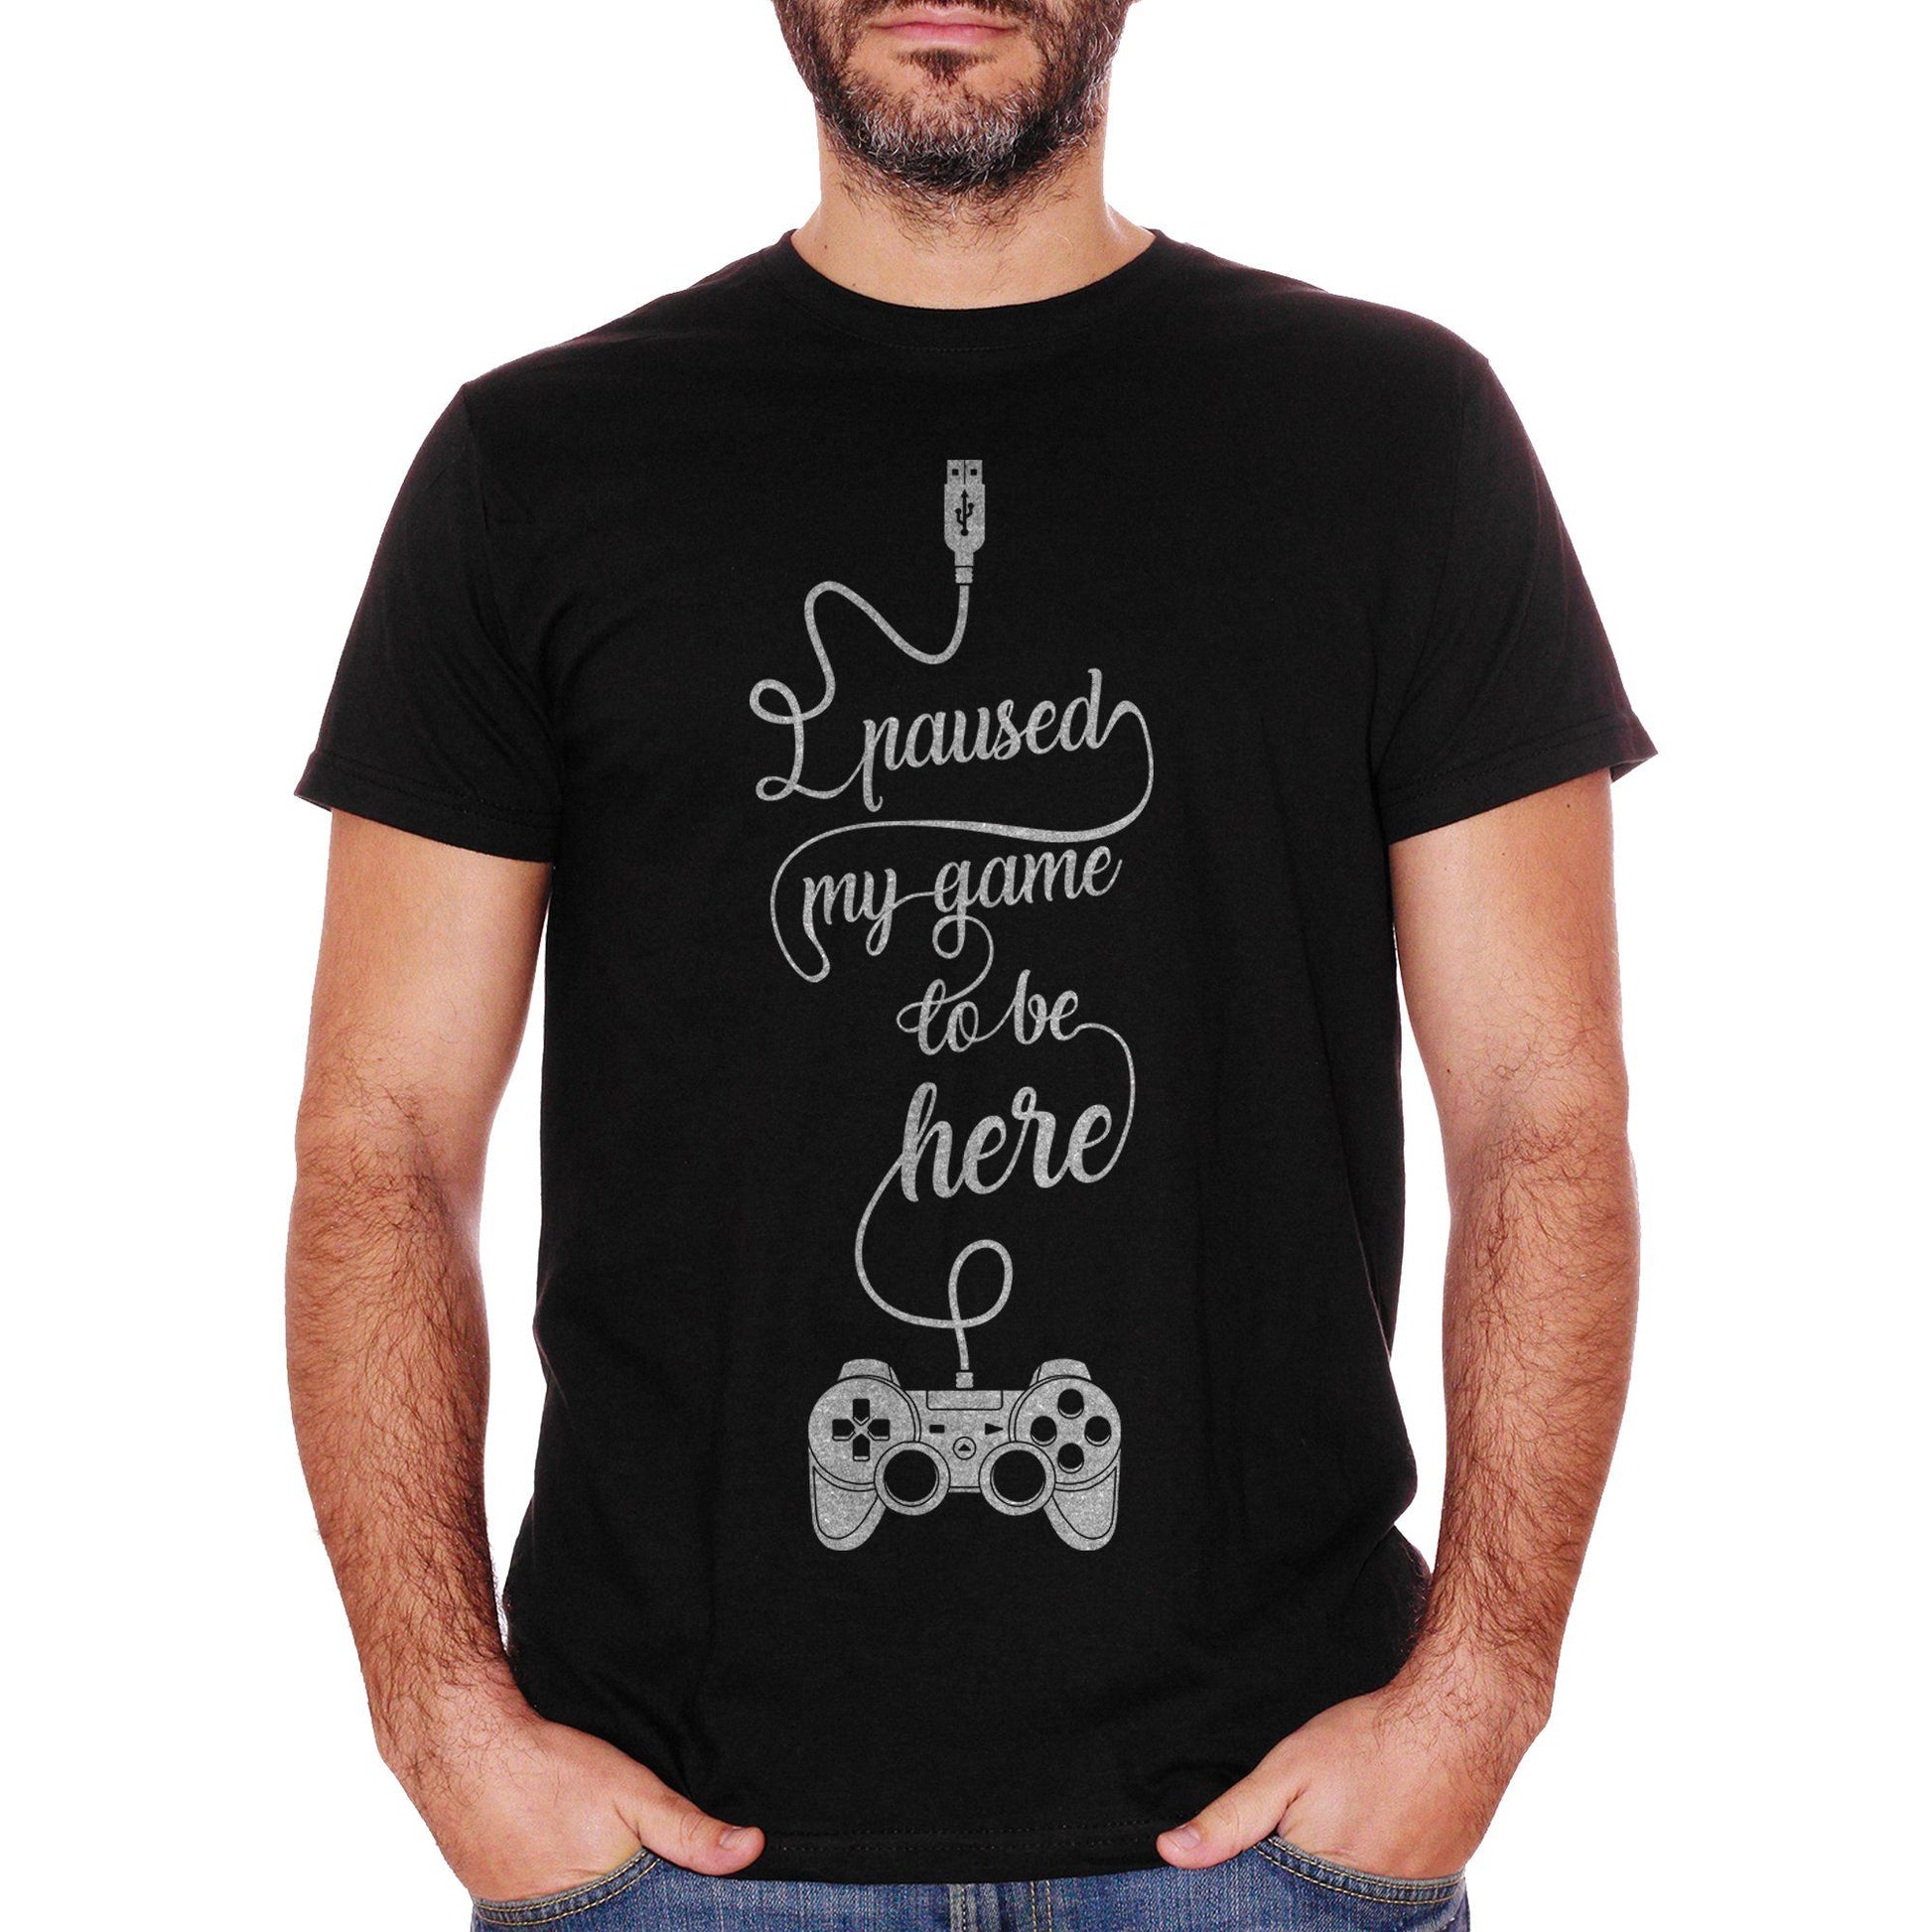 White T-Shirt I Paused My Game To Be Here Play Game Videogame Joypad - GAMES CucShop